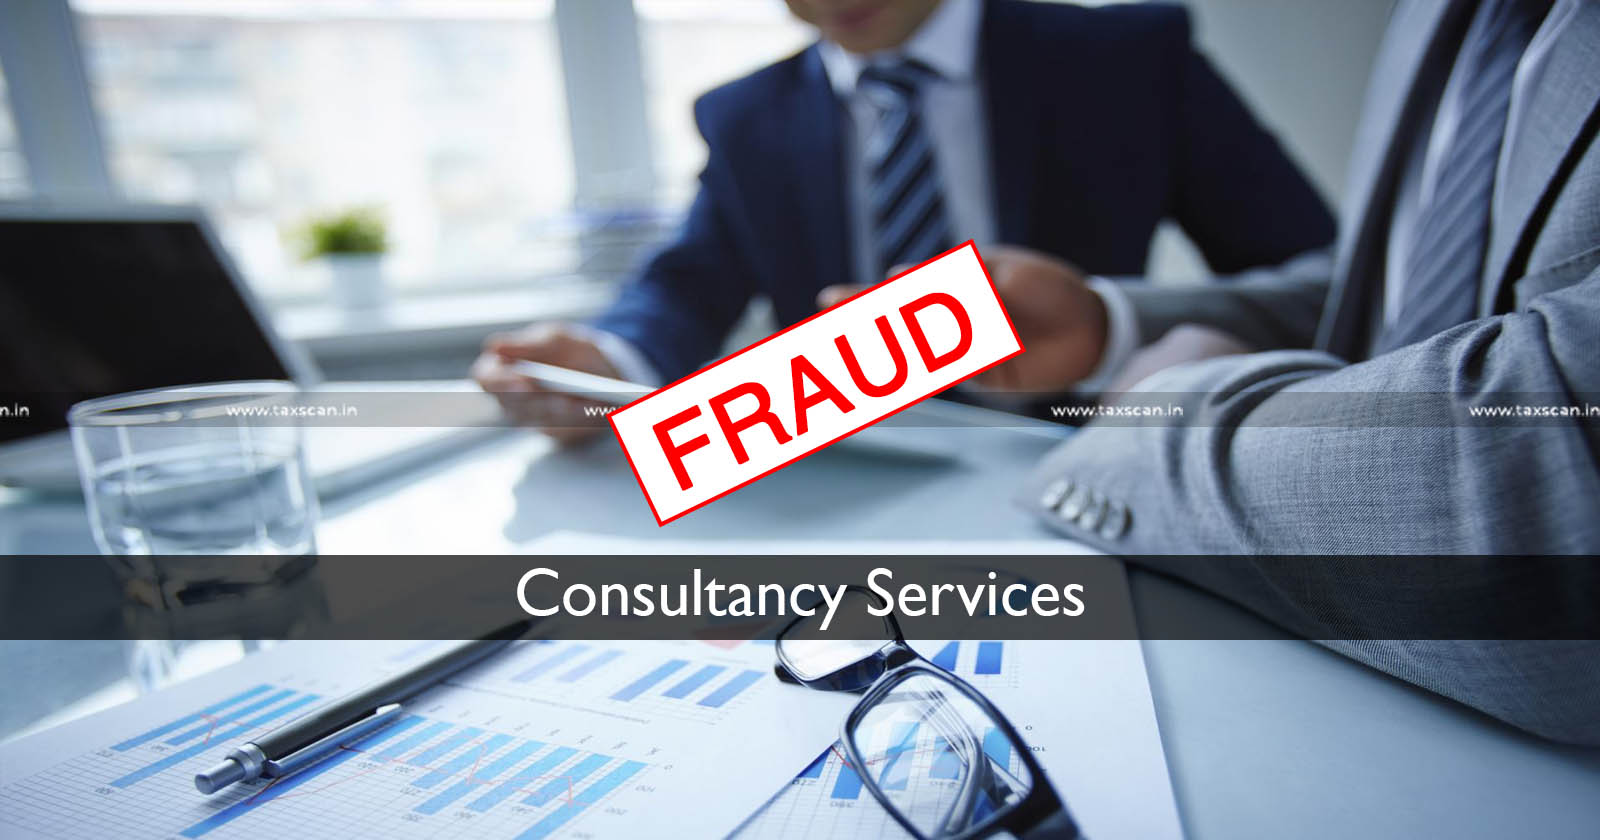 Fraud in Consultancy Services - Consultancy Services - Fraud - ICAI - ICAI Removes Name of Chartered Accountant - Chartered Accountant - imposes penalty - penalty - taxscan